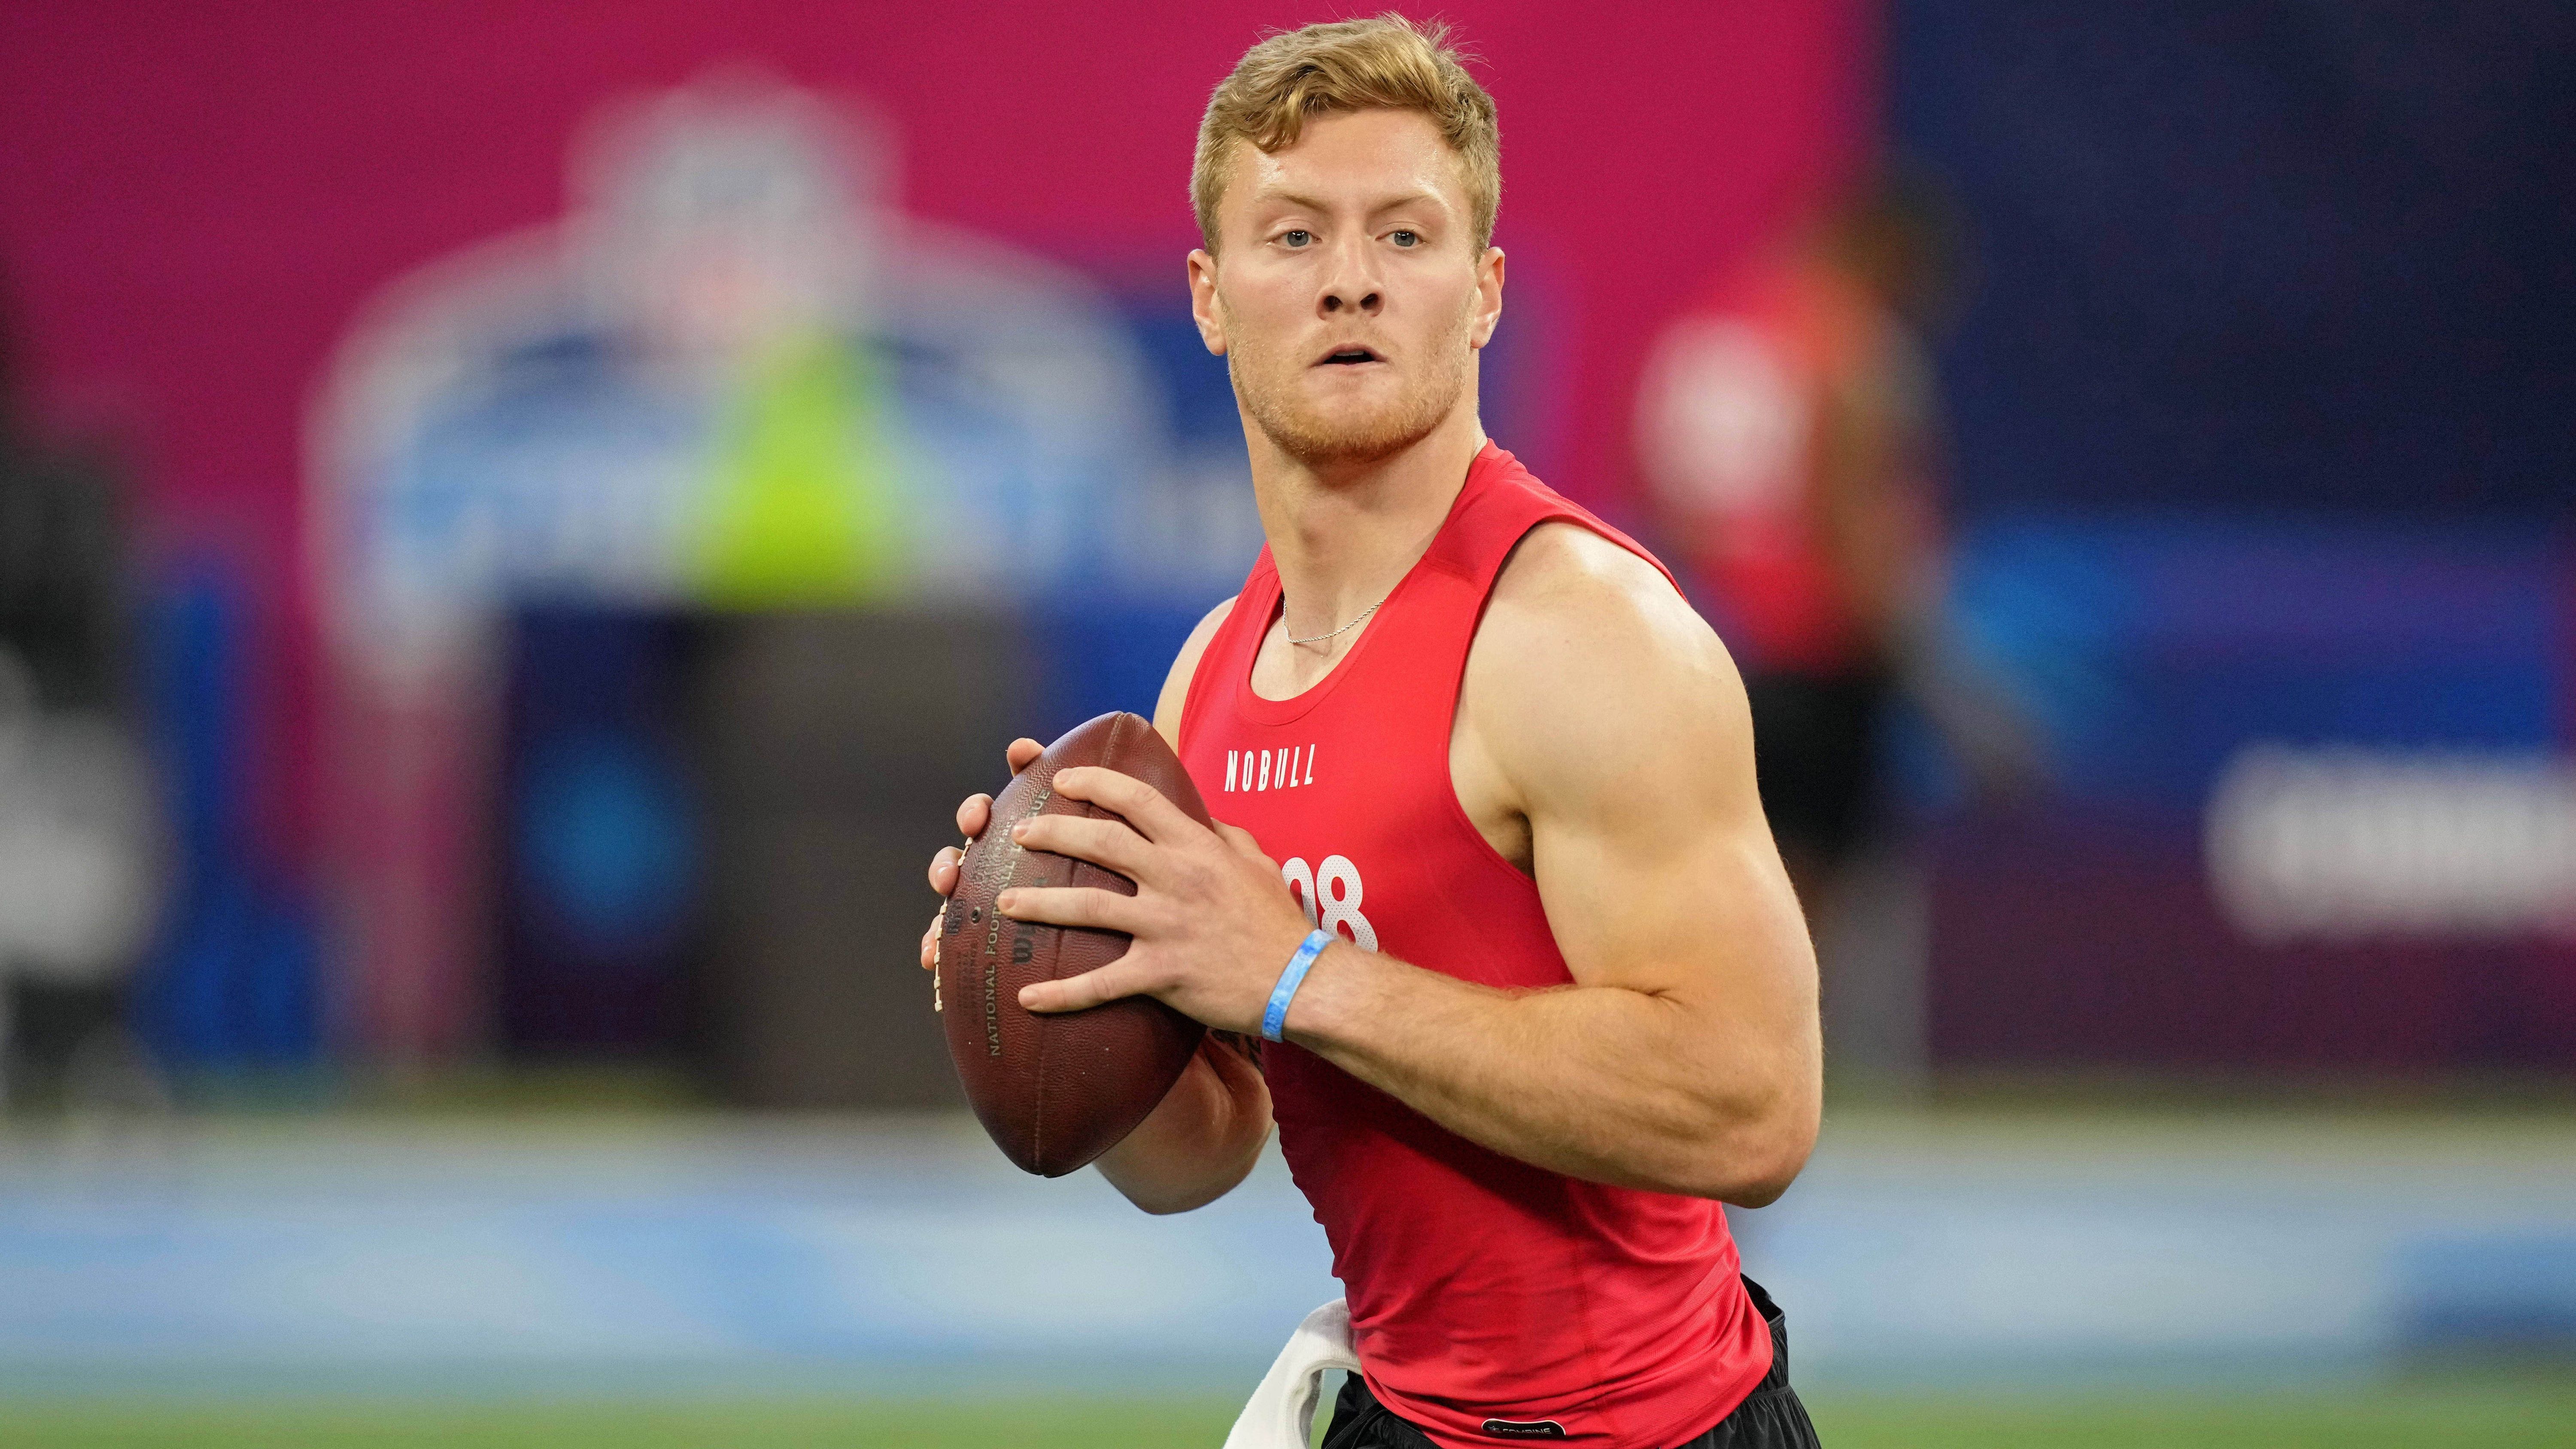 
                <strong>Wer wird der Nummer-2-Pick?</strong><br>
                &#x2022; Will Levis (Foto, Kentucky, QB) +170<br>&#x2022; Will Anderson (Alabama, LB) +270<br>&#x2022; Tyree Wilson (Texas, LB) +300<br>&#x2022; C.J. Stroud (Ohio State, QB) +400<br>&#x2022; Bryce Young (Alabama, QB) +1600<br>&#x2022; Jalen Carter (Georgia, DT) +3000<br>&#x2022; Anthony Richardson (Florida, QB) +3400<br>
              